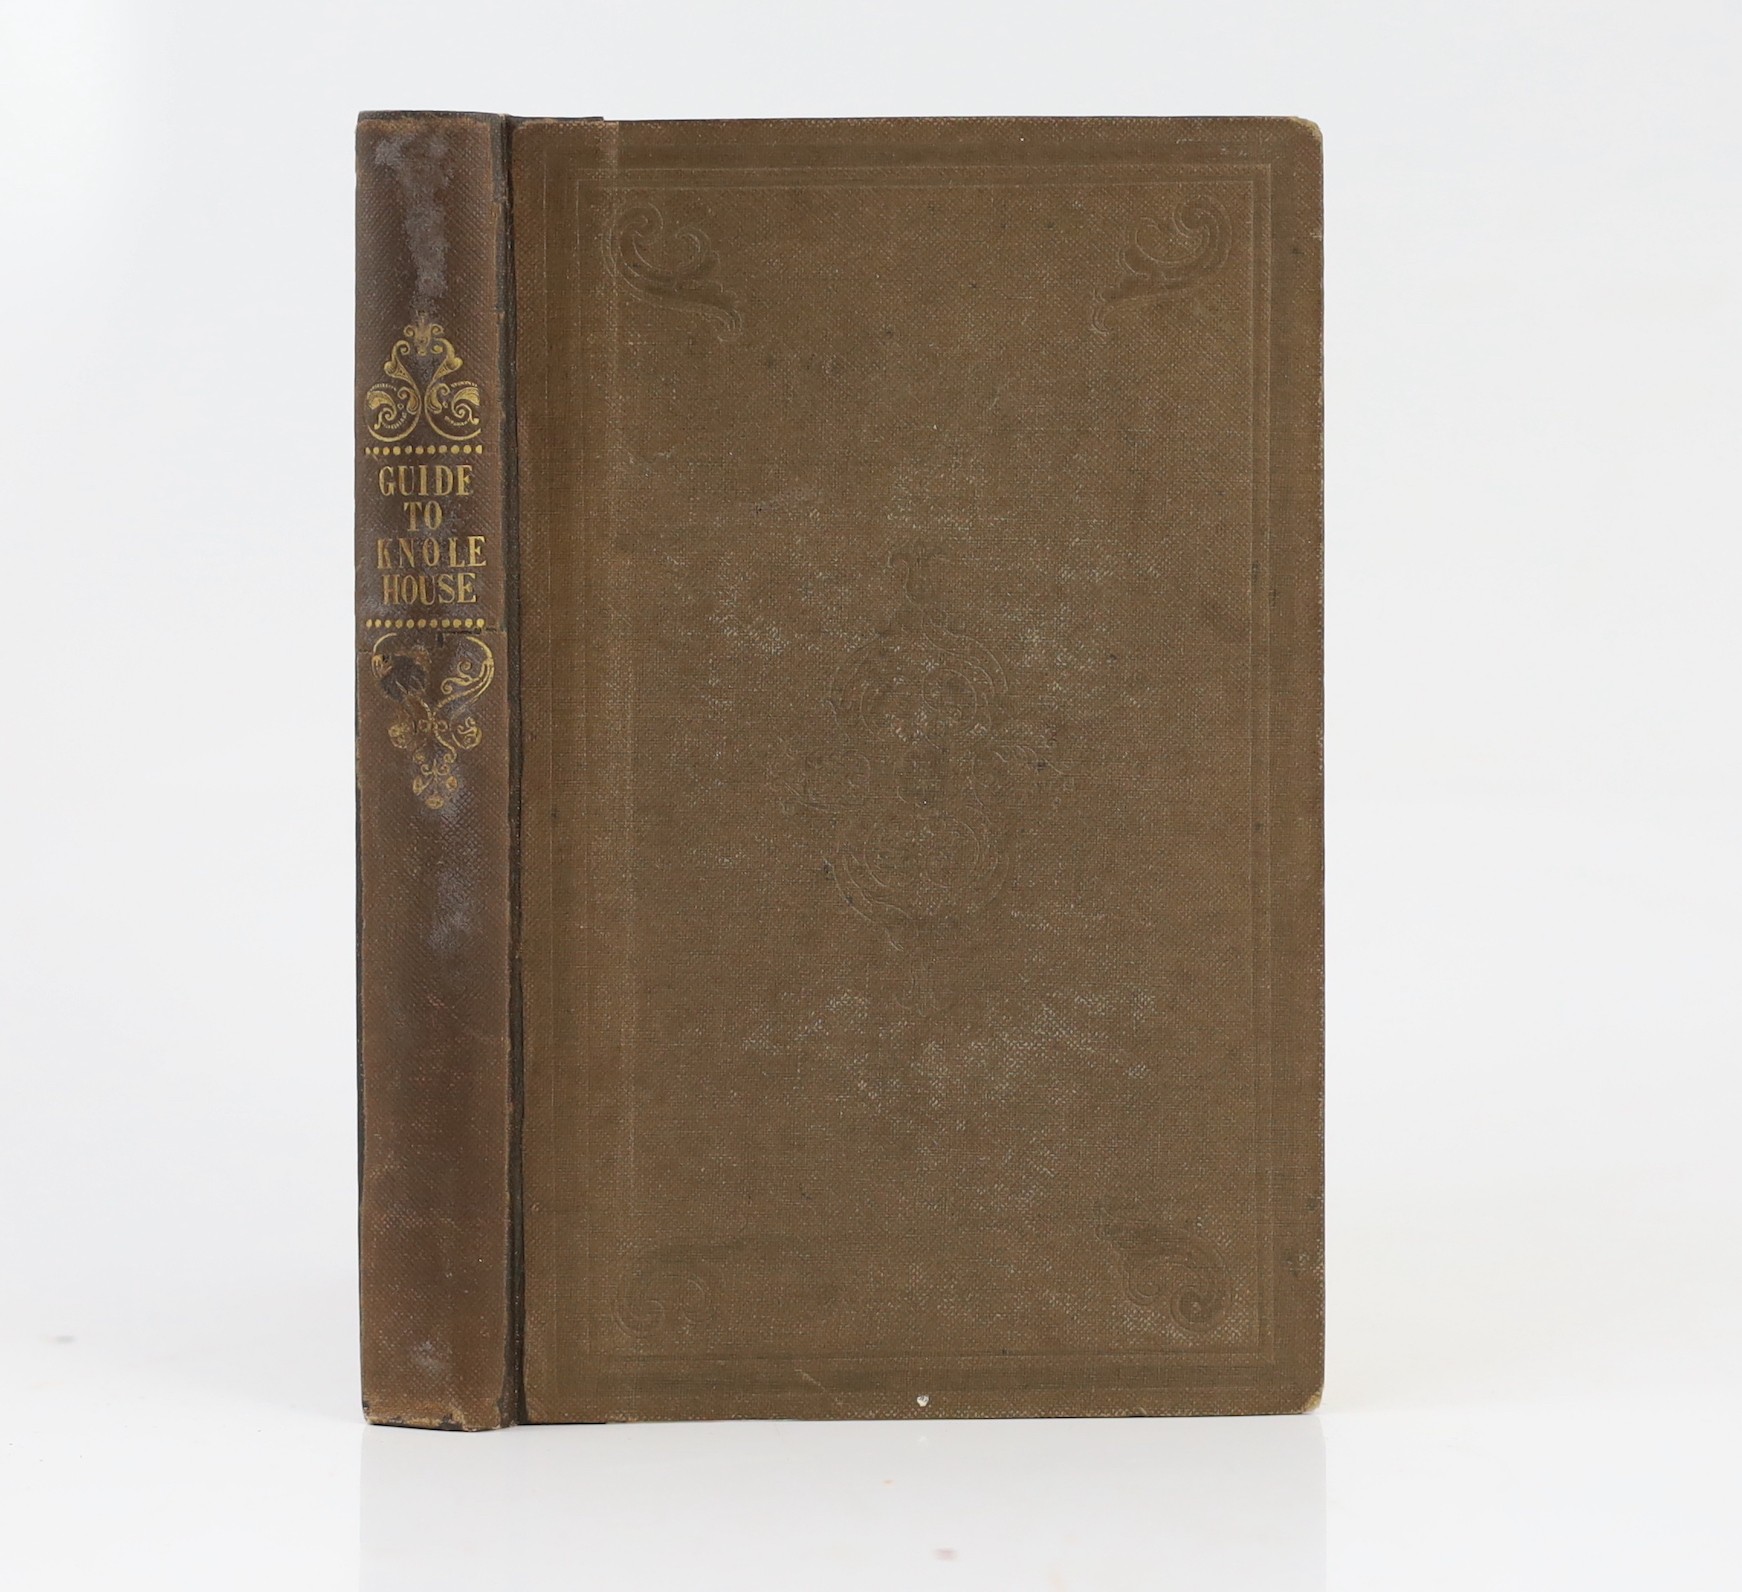 KENT: Brady, John H. - The Visitor's Guide to Knole ... with Catalogues of the Pictures ... 6 plates, folded pedigree and text engravings, half title, errata slip; original blind-decorated and gilt-lettered cloth, 12mo.